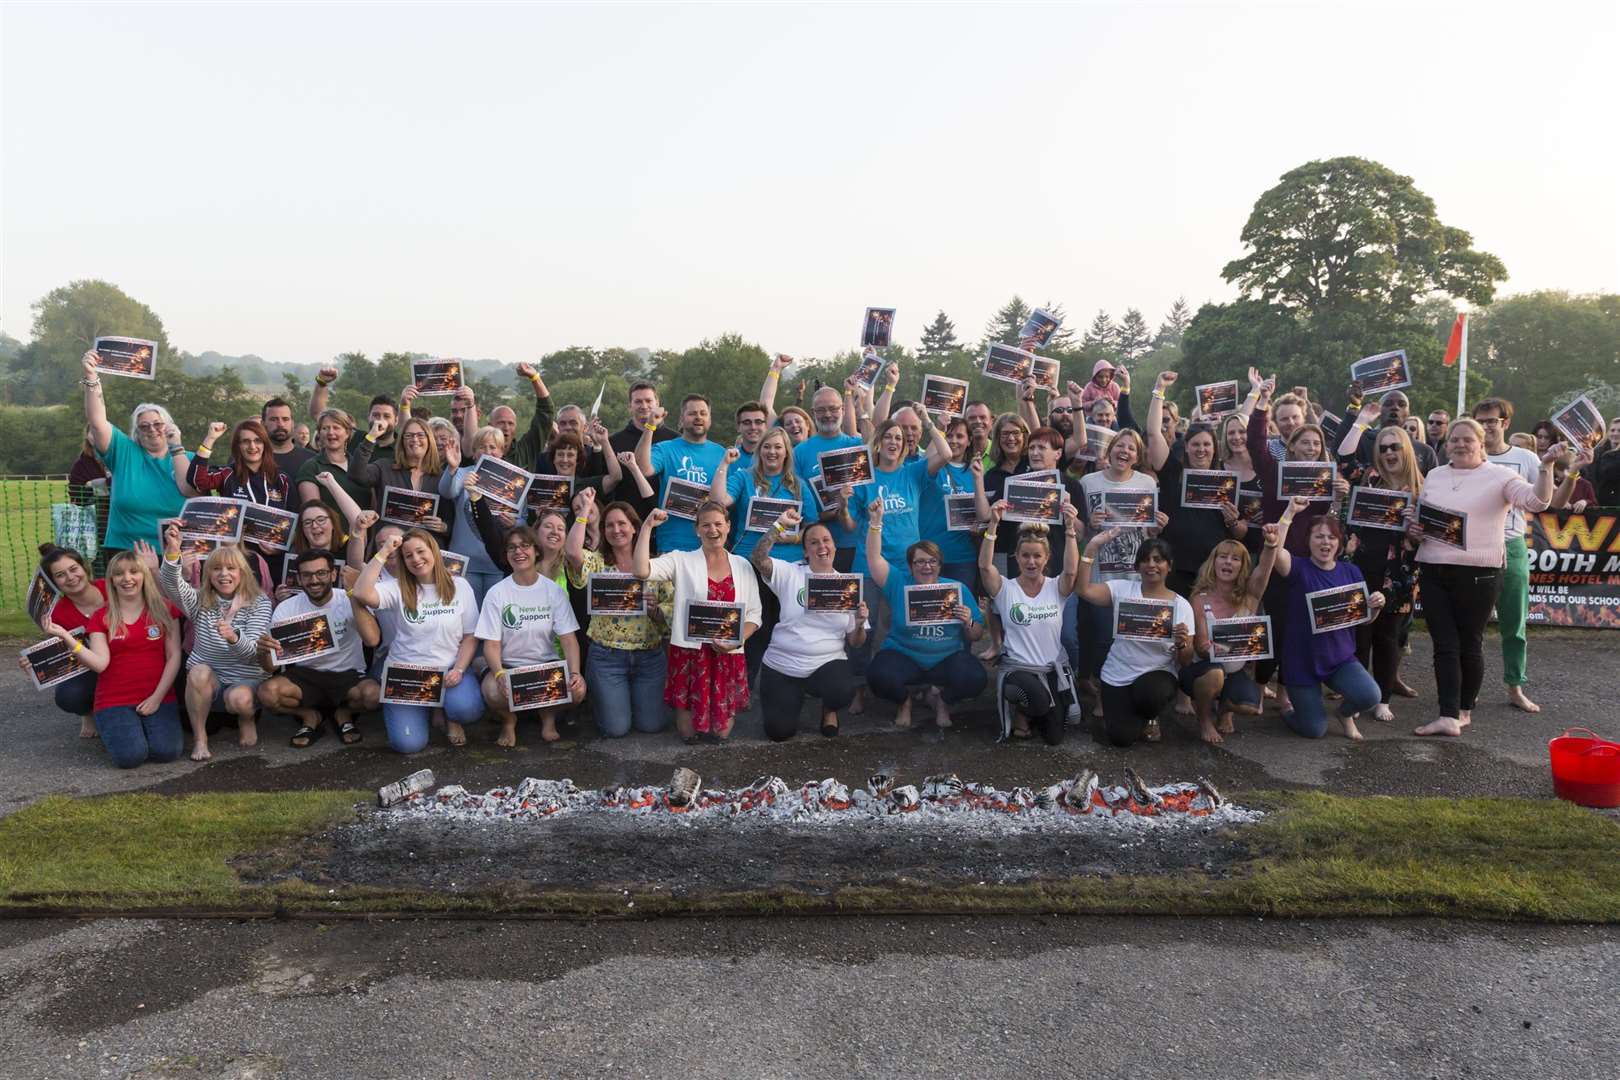 Participants celebrate their achievement at Buster's Firewalk, staged by the KM Charity Team at the Great Danes Mercure Hotel, Maidstone. (2130475)